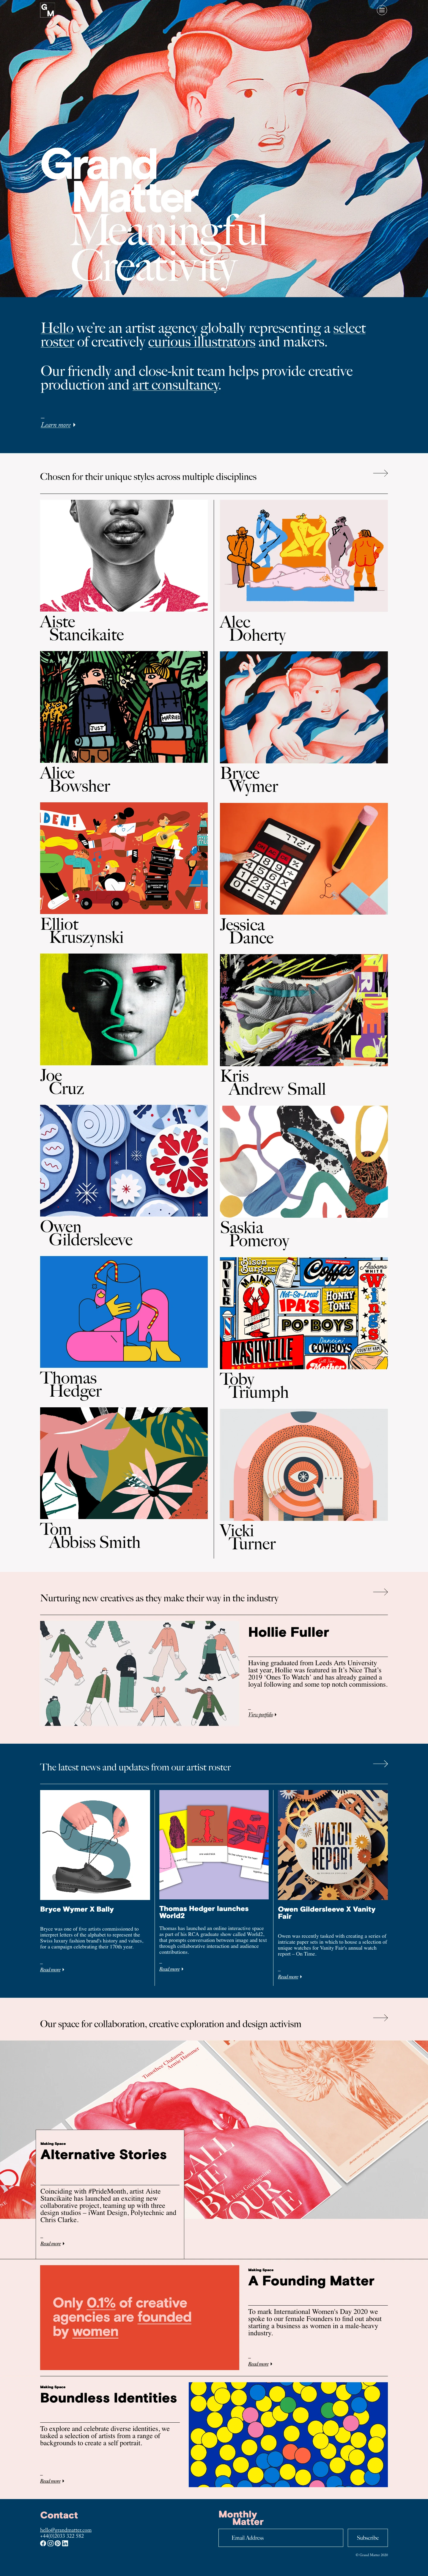 Grand Matter Landing Page Example: Hello we’re an artist agency globally representing a select roster of creatively curious illustrators and makers. Our friendly and close-knit team helps provide creative production and art consultancy.